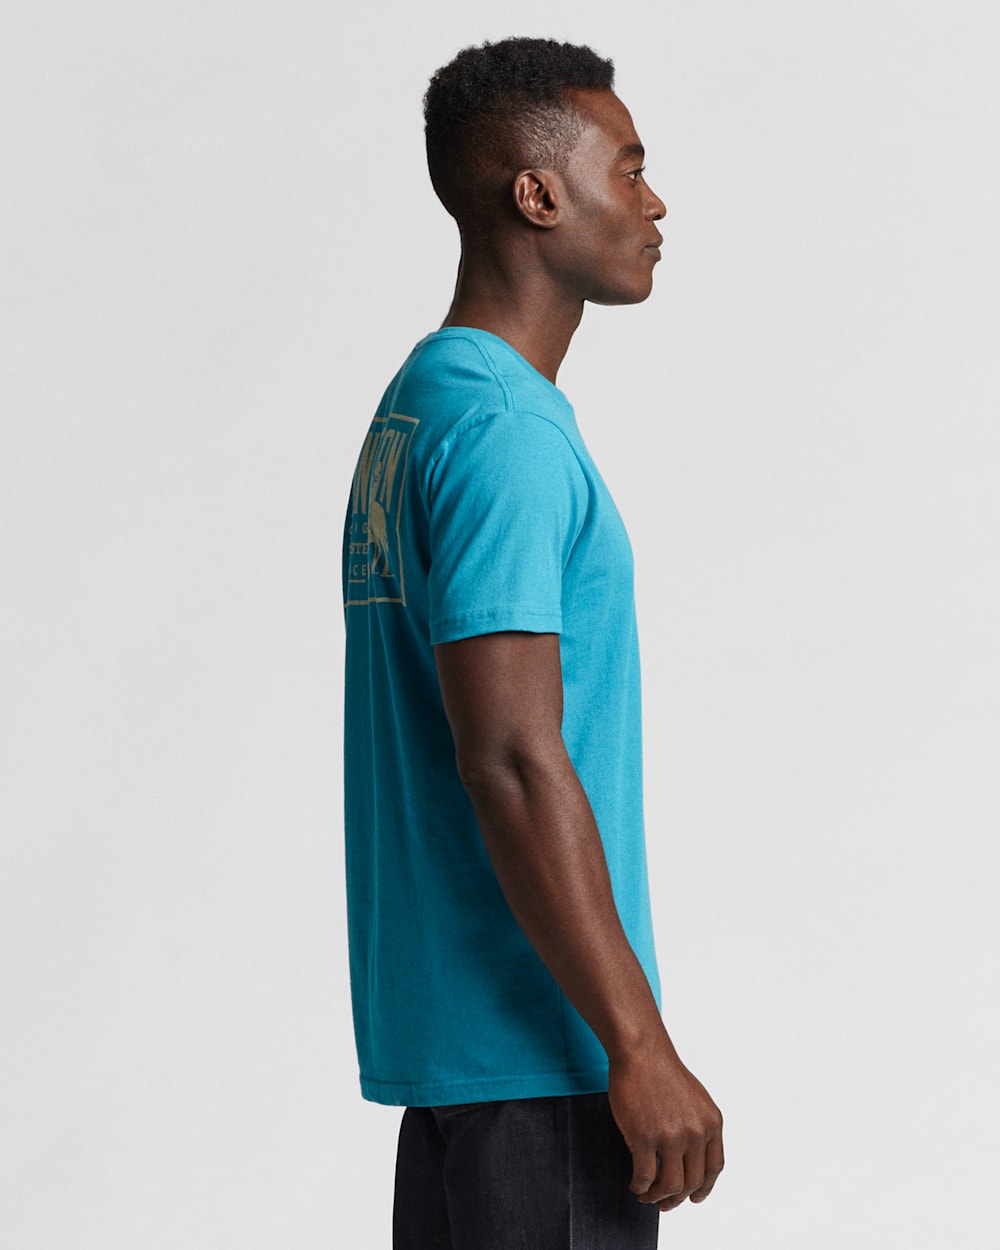 ALTERNATE VIEW OF MEN'S ORIGINAL WESTERN GRAPHIC TEE IN TEAL/WHITE image number 3